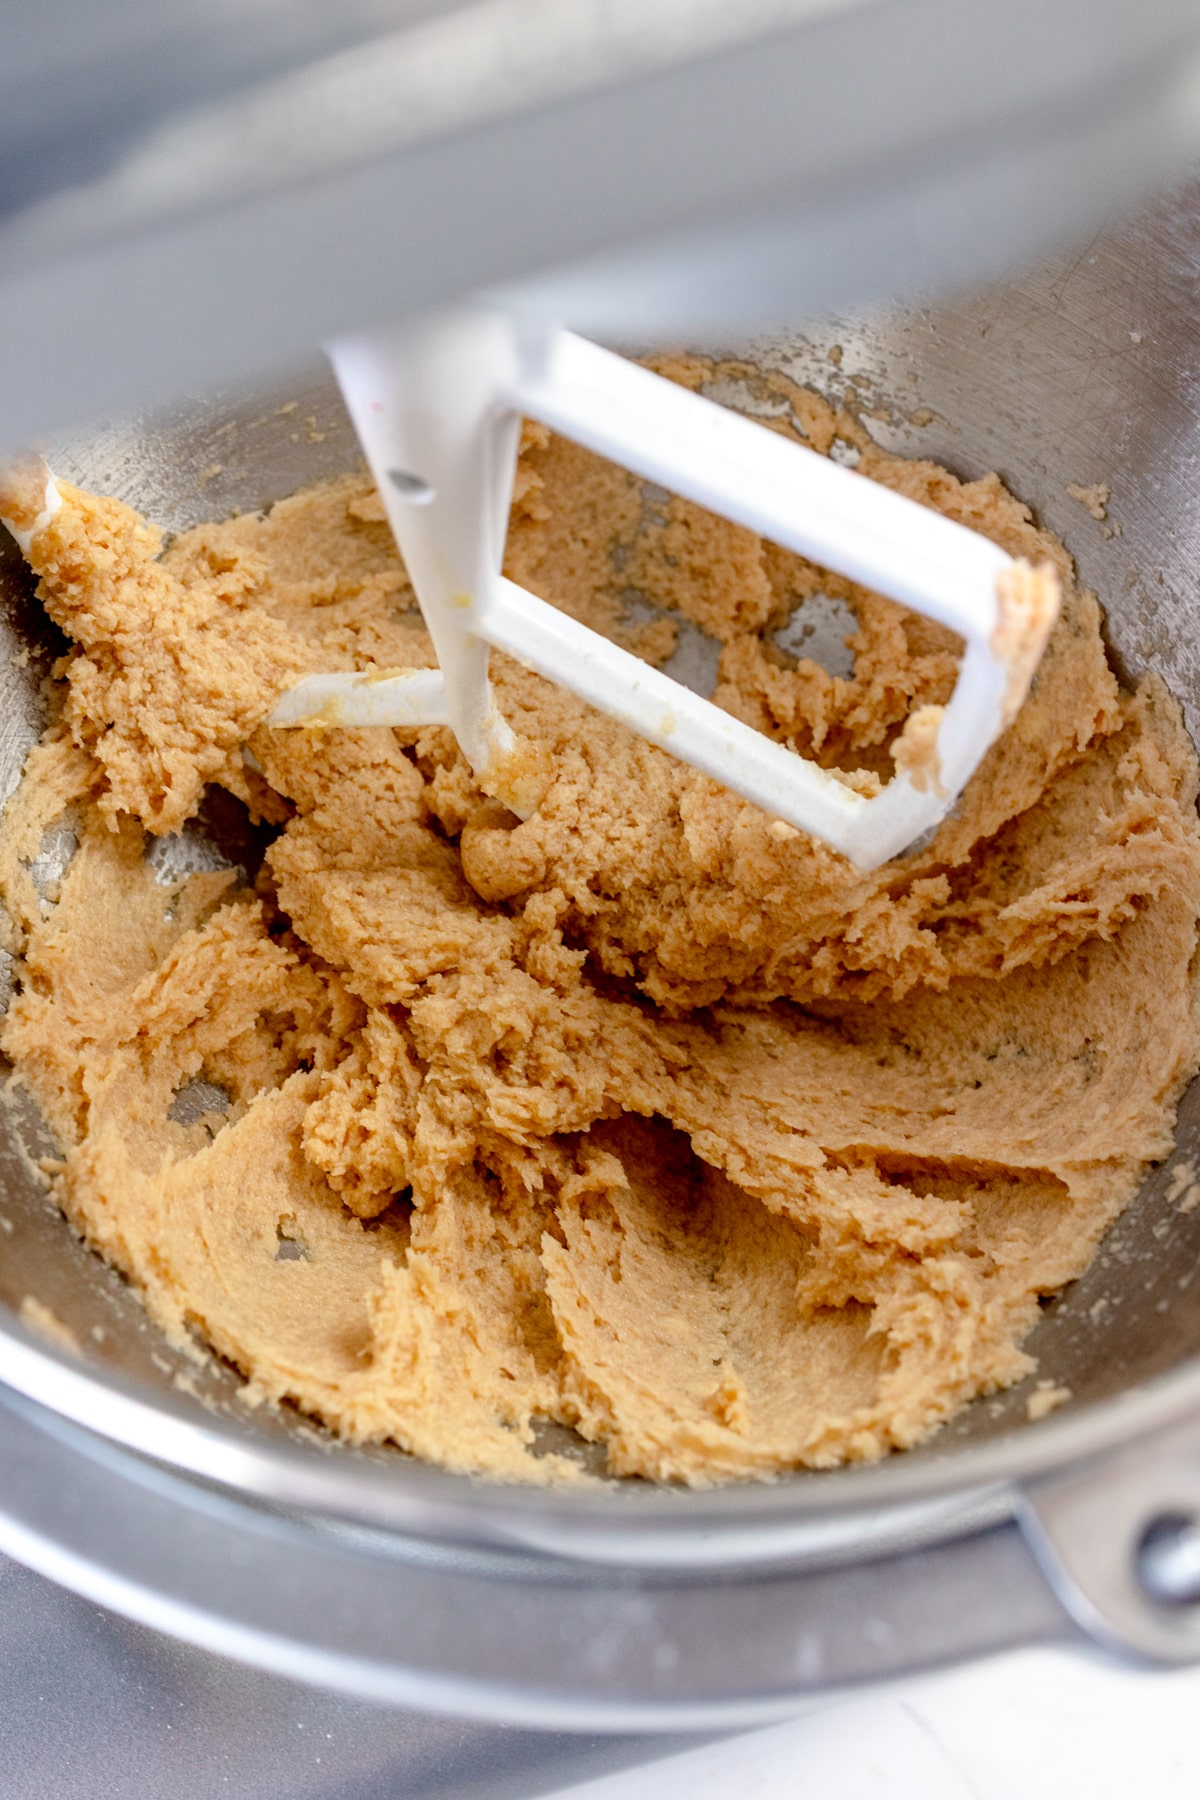 Close up of the bowl of a stand mixer with a creamed mixture in it.